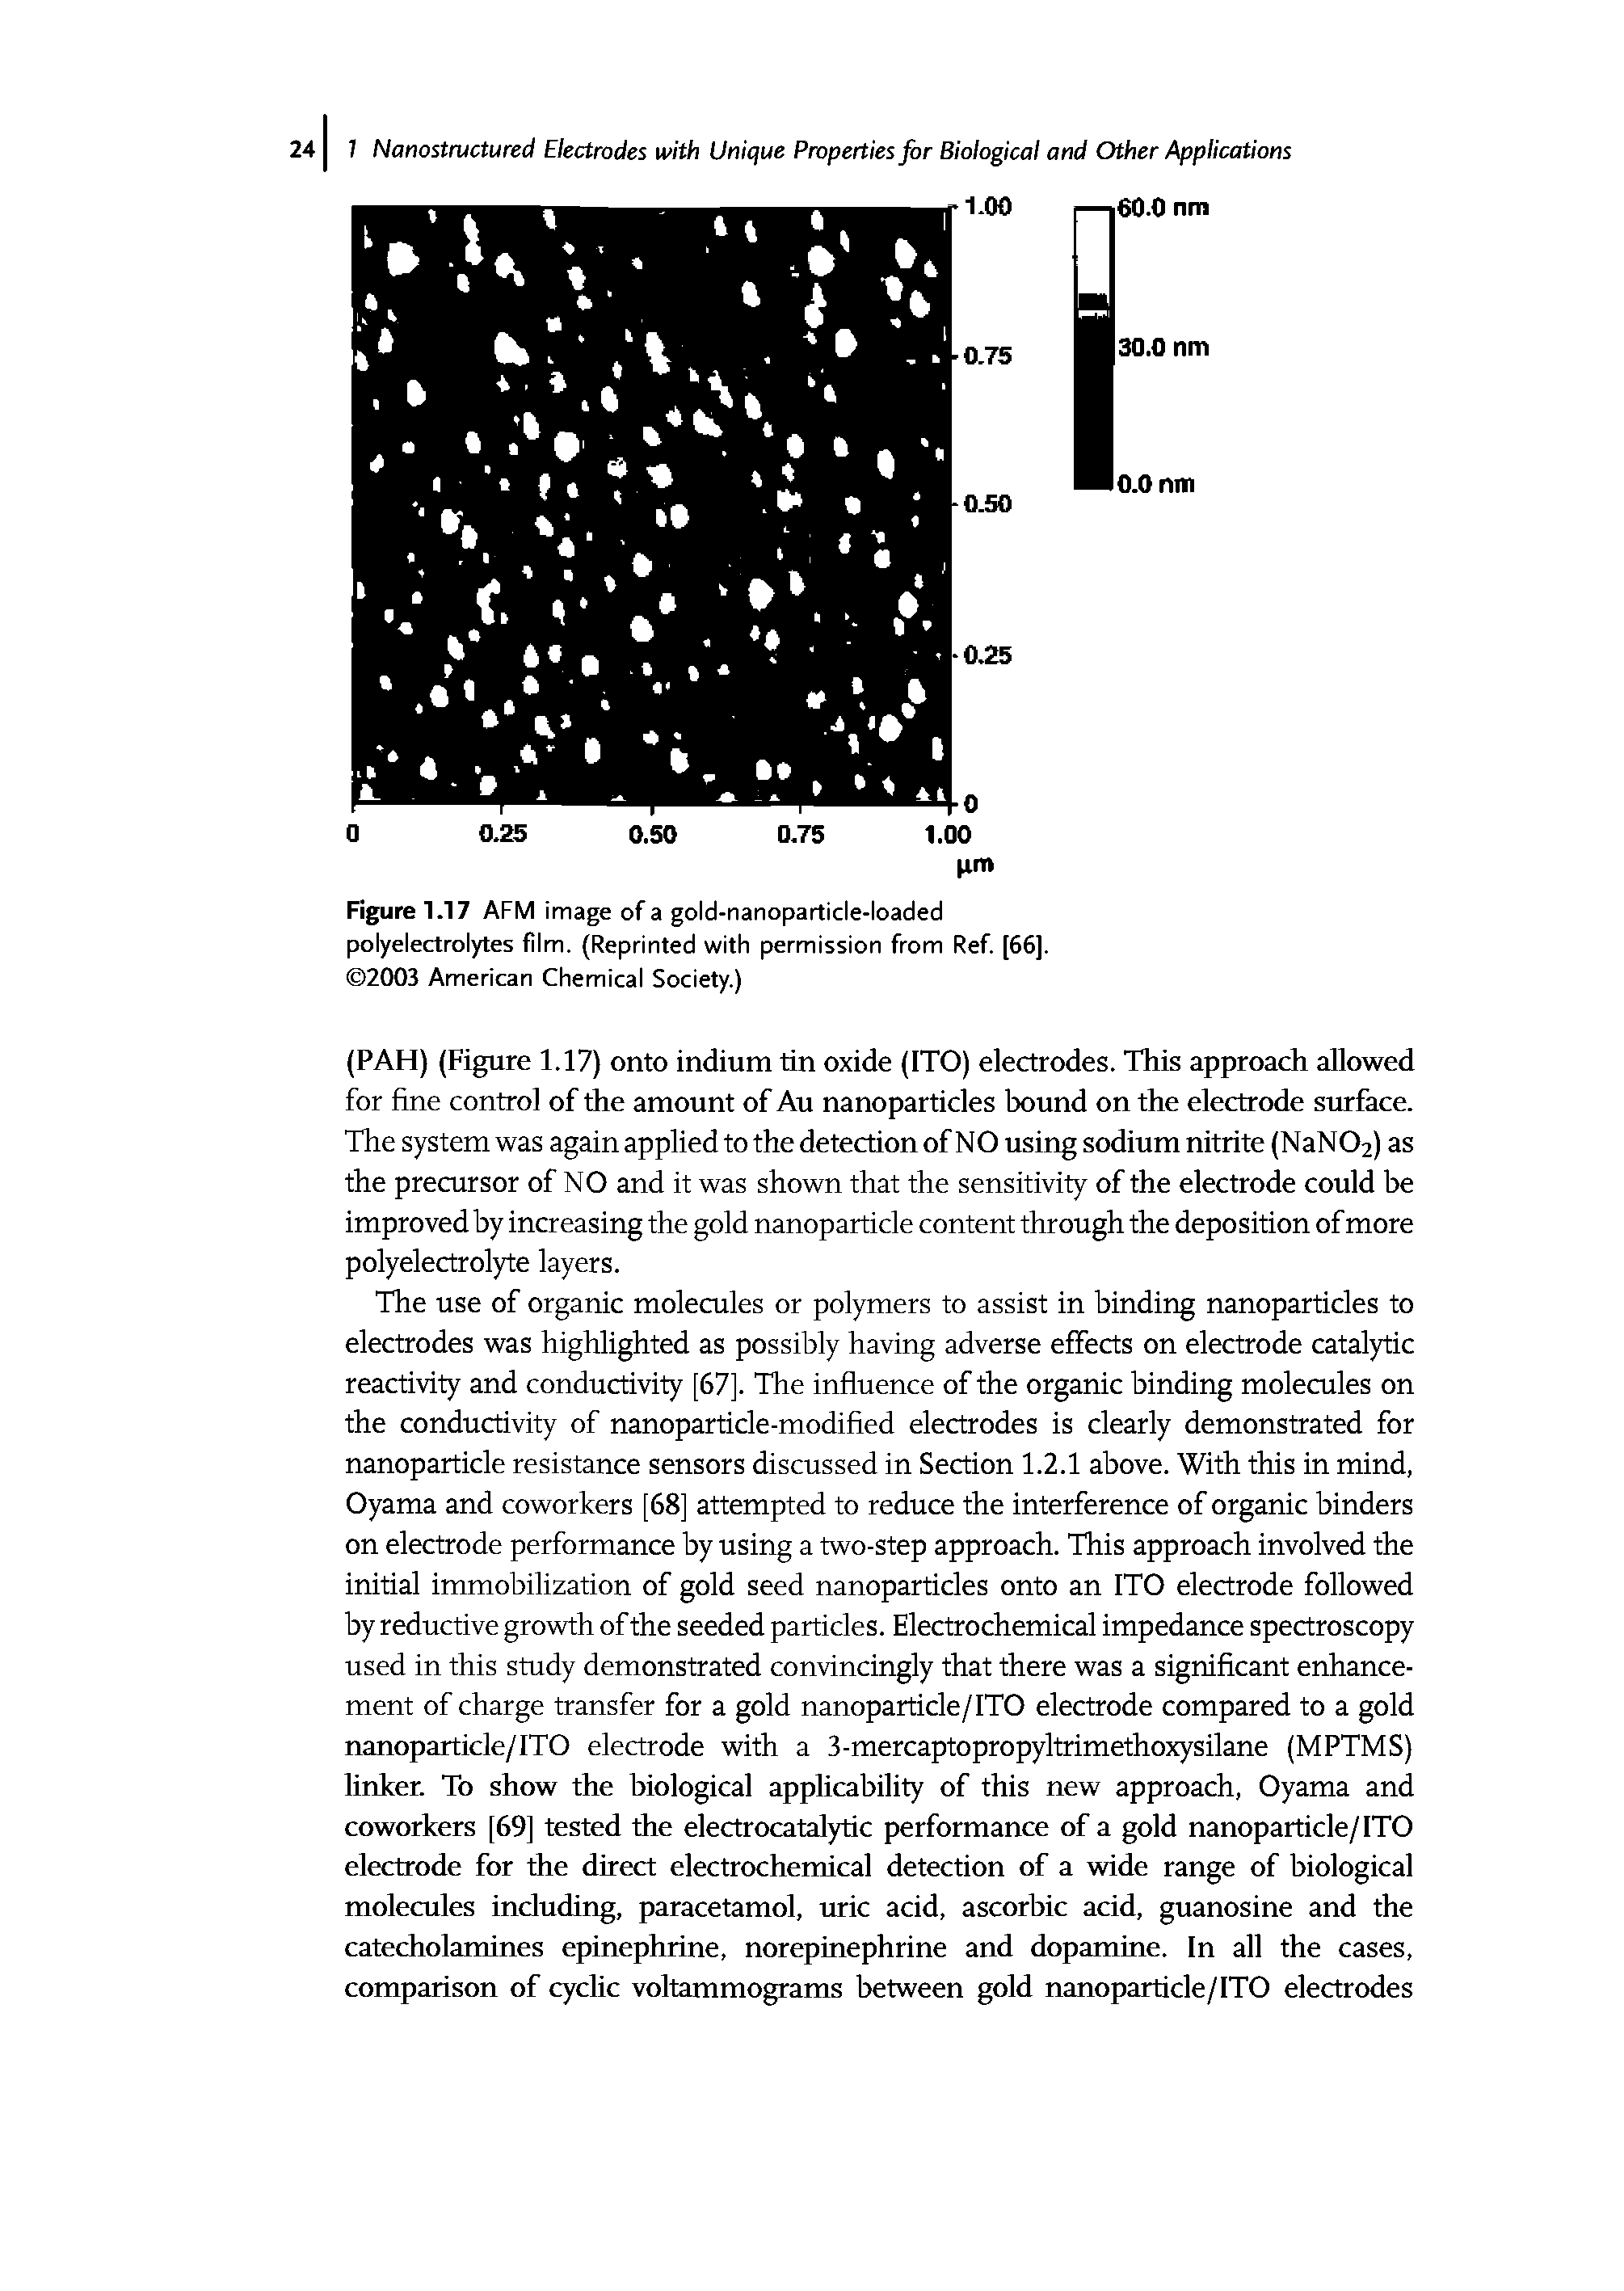 Figure 1.17 AFM image of a gold-nanoparticle-loaded polyelectrolytes film. (Reprinted with permission from Ref [66]. 2003 American Chemical Society.)...